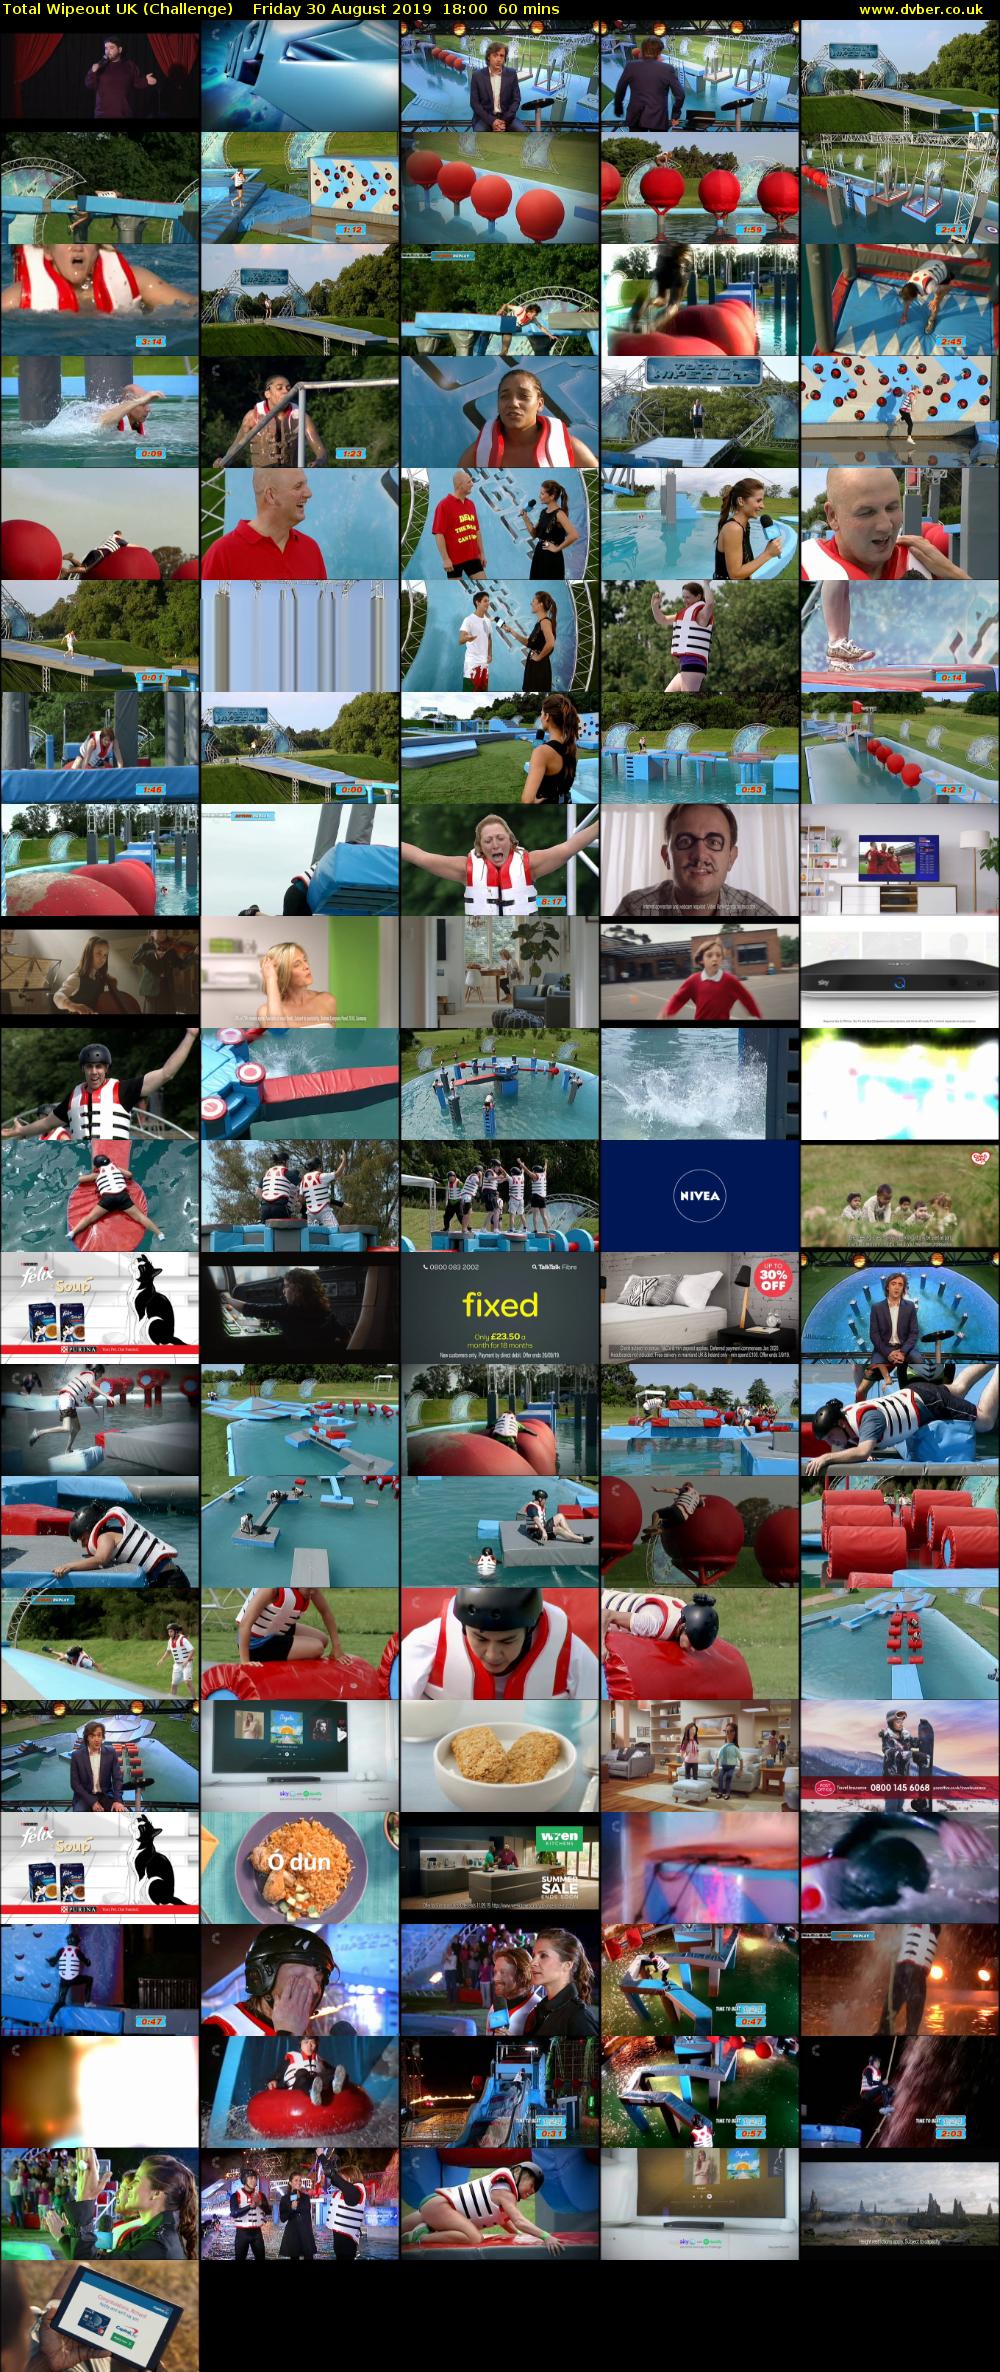 Total Wipeout UK (Challenge) Friday 30 August 2019 18:00 - 19:00